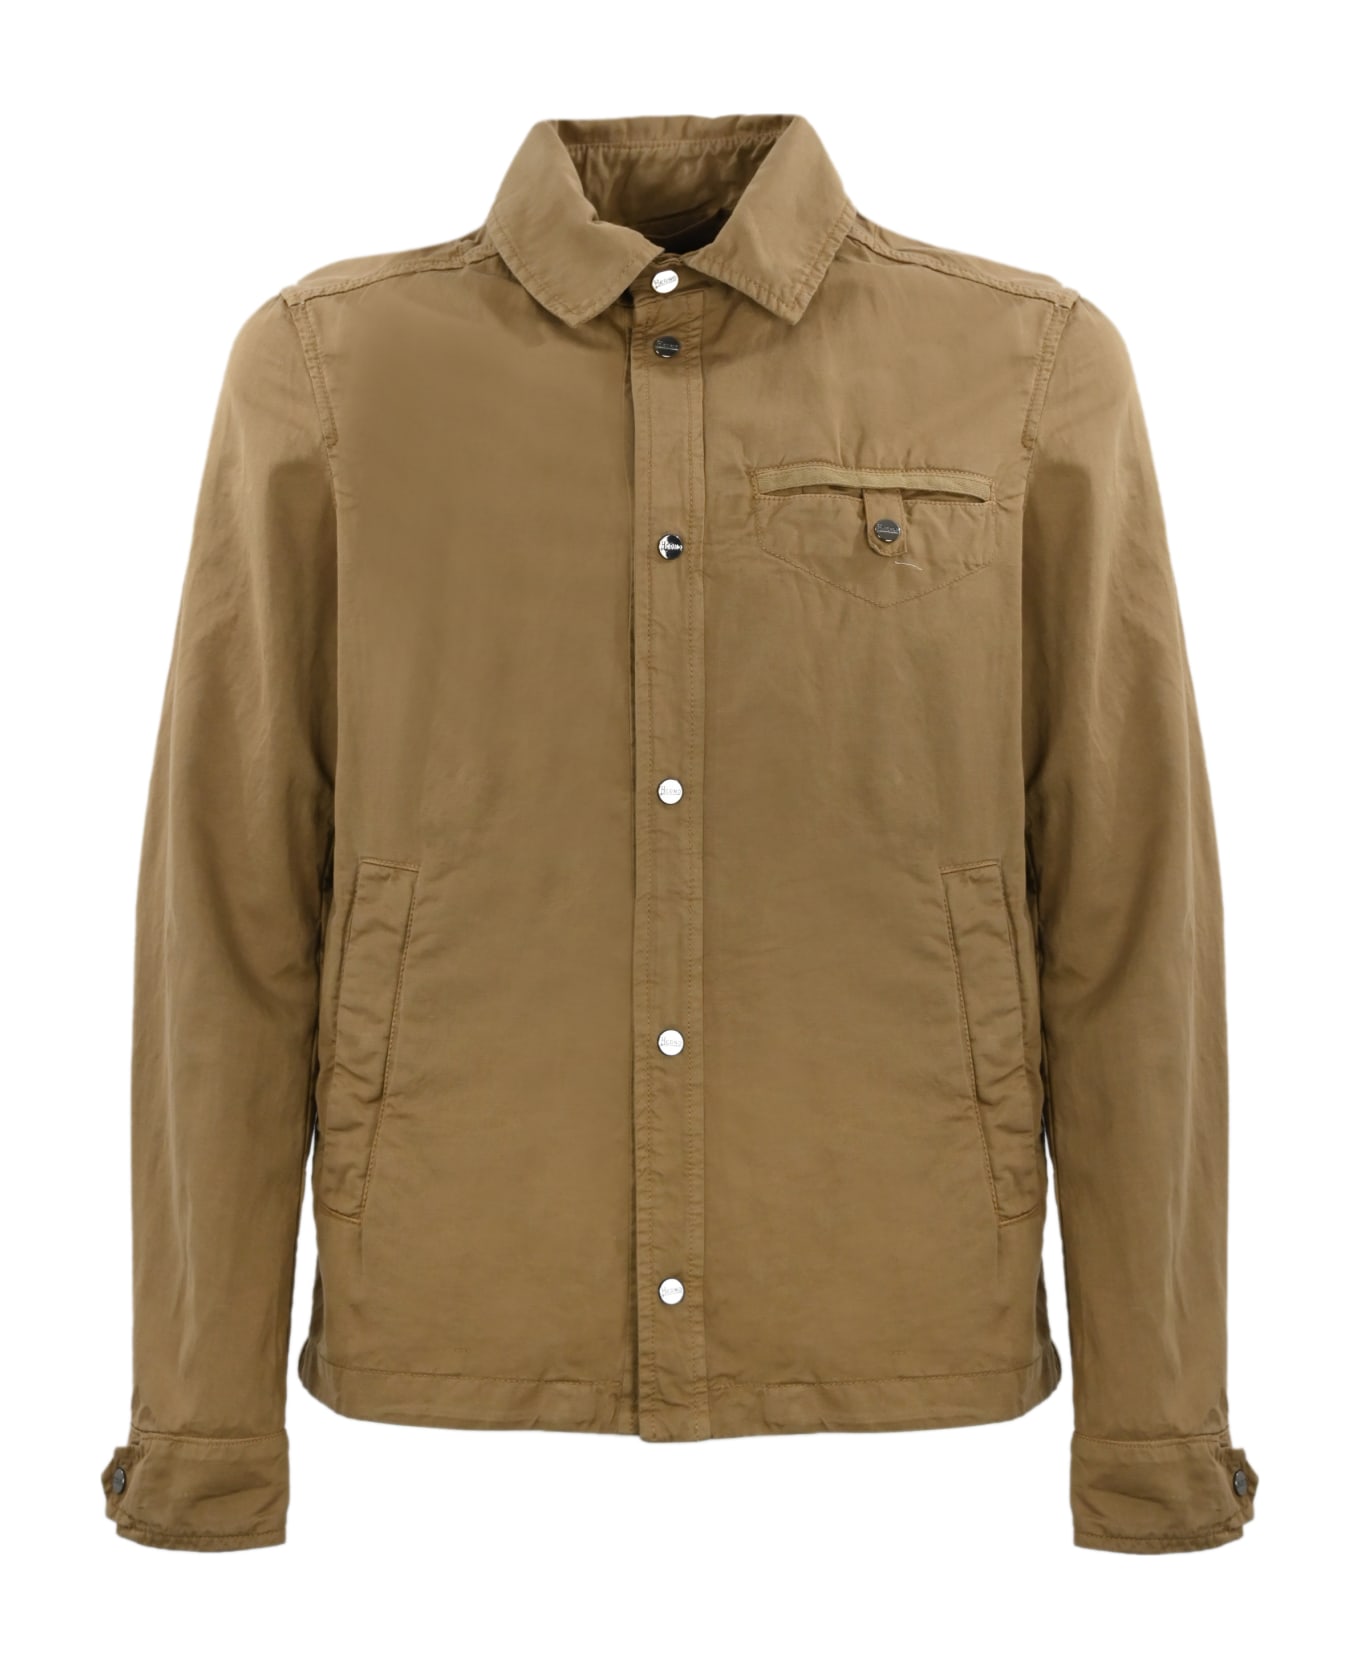 Herno Jacket In Cotton And Linen Blend - Cammello